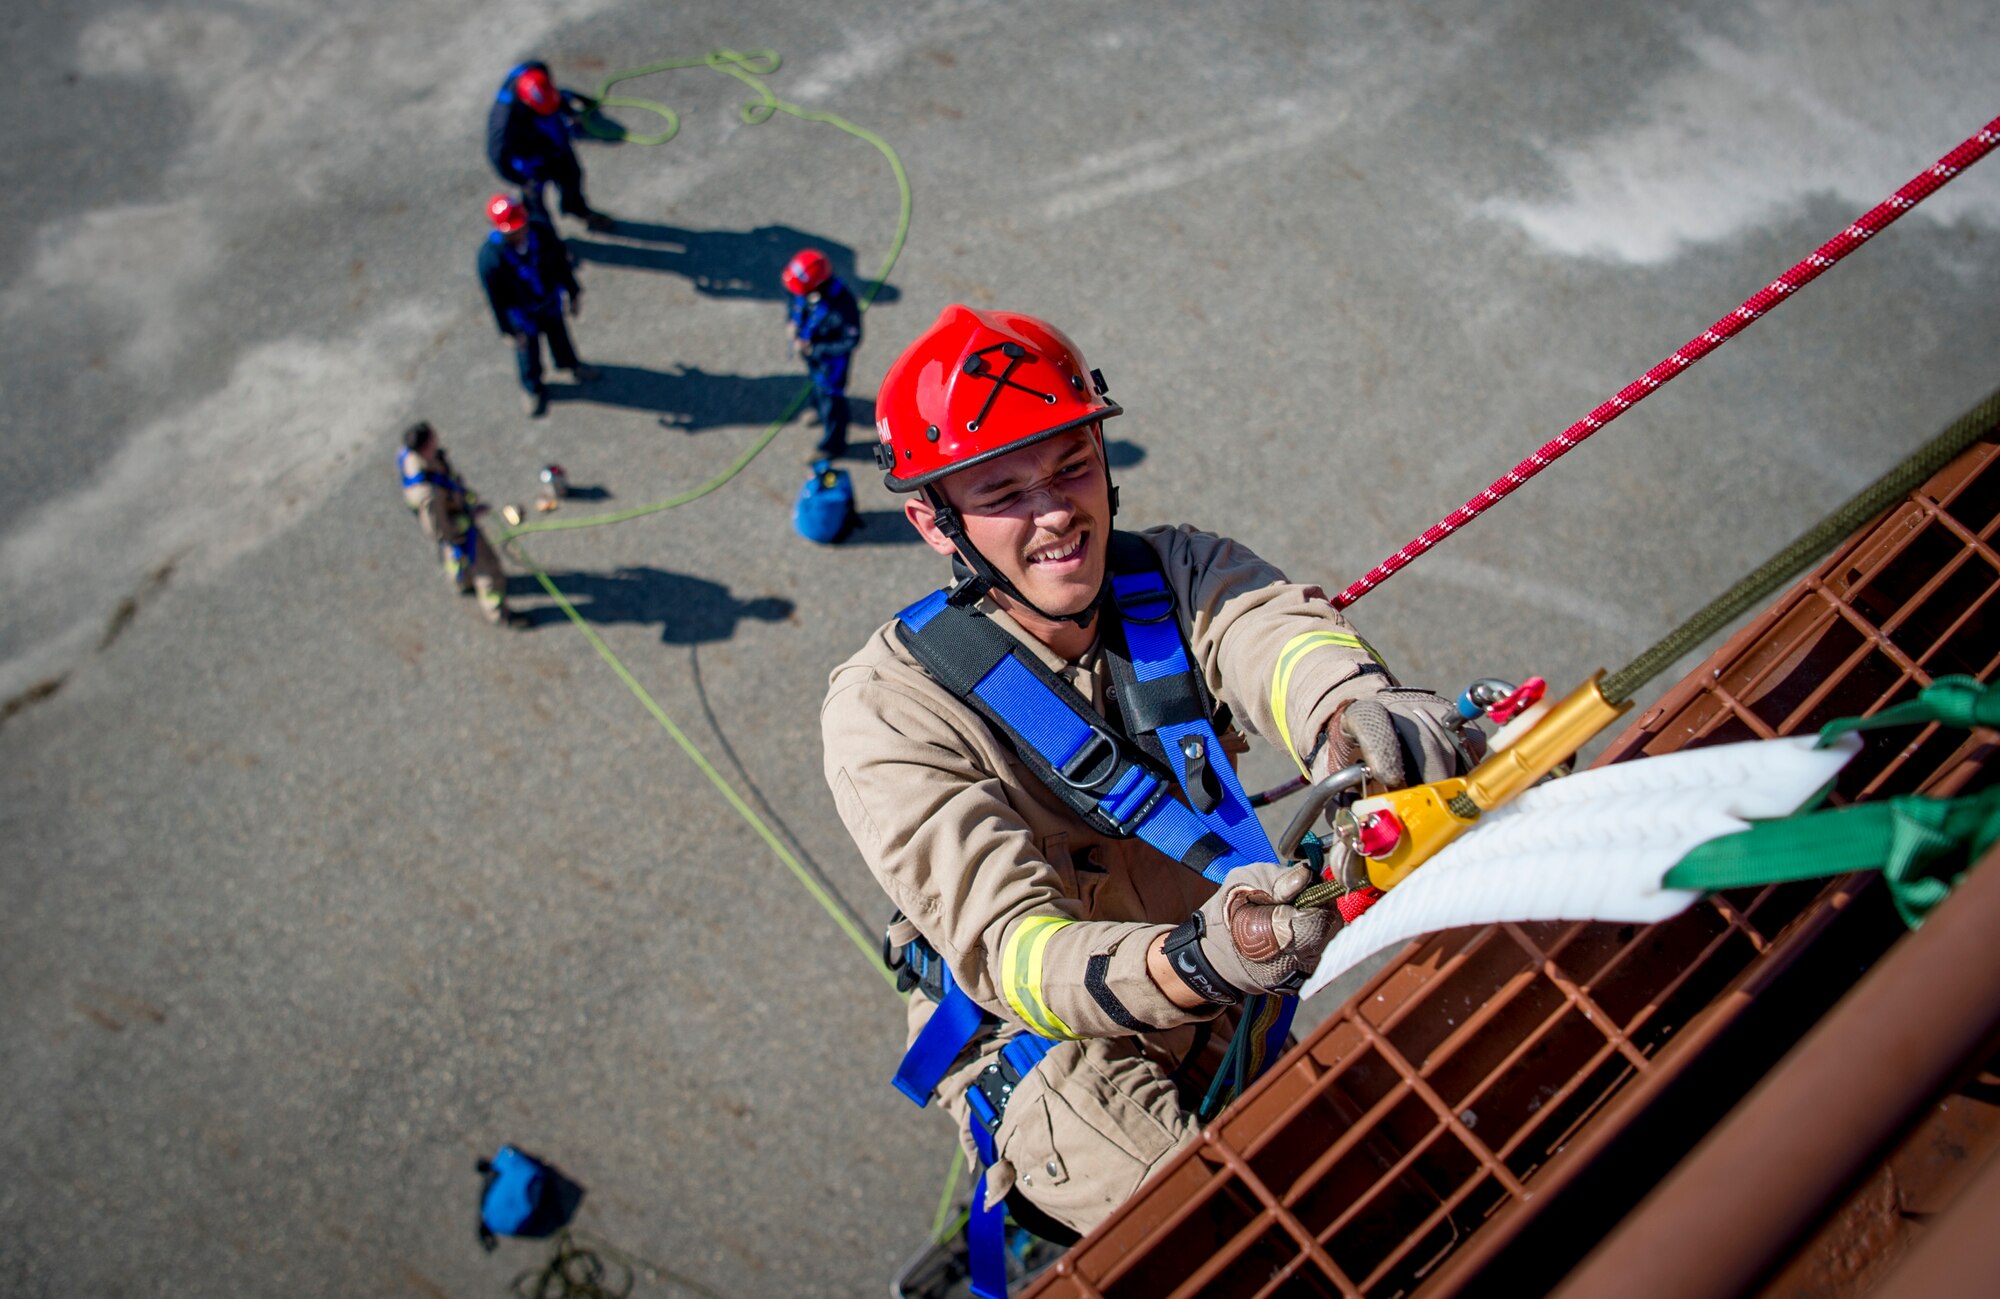 U.S. Air Force Airman 1st Class Josehia Hotz, 633rd Civil Engineer Squadron firefighter, ascends the side of a building during the final evaluation at Joint Base Langley-Eustis, Virginia, Oct.15, 2018.